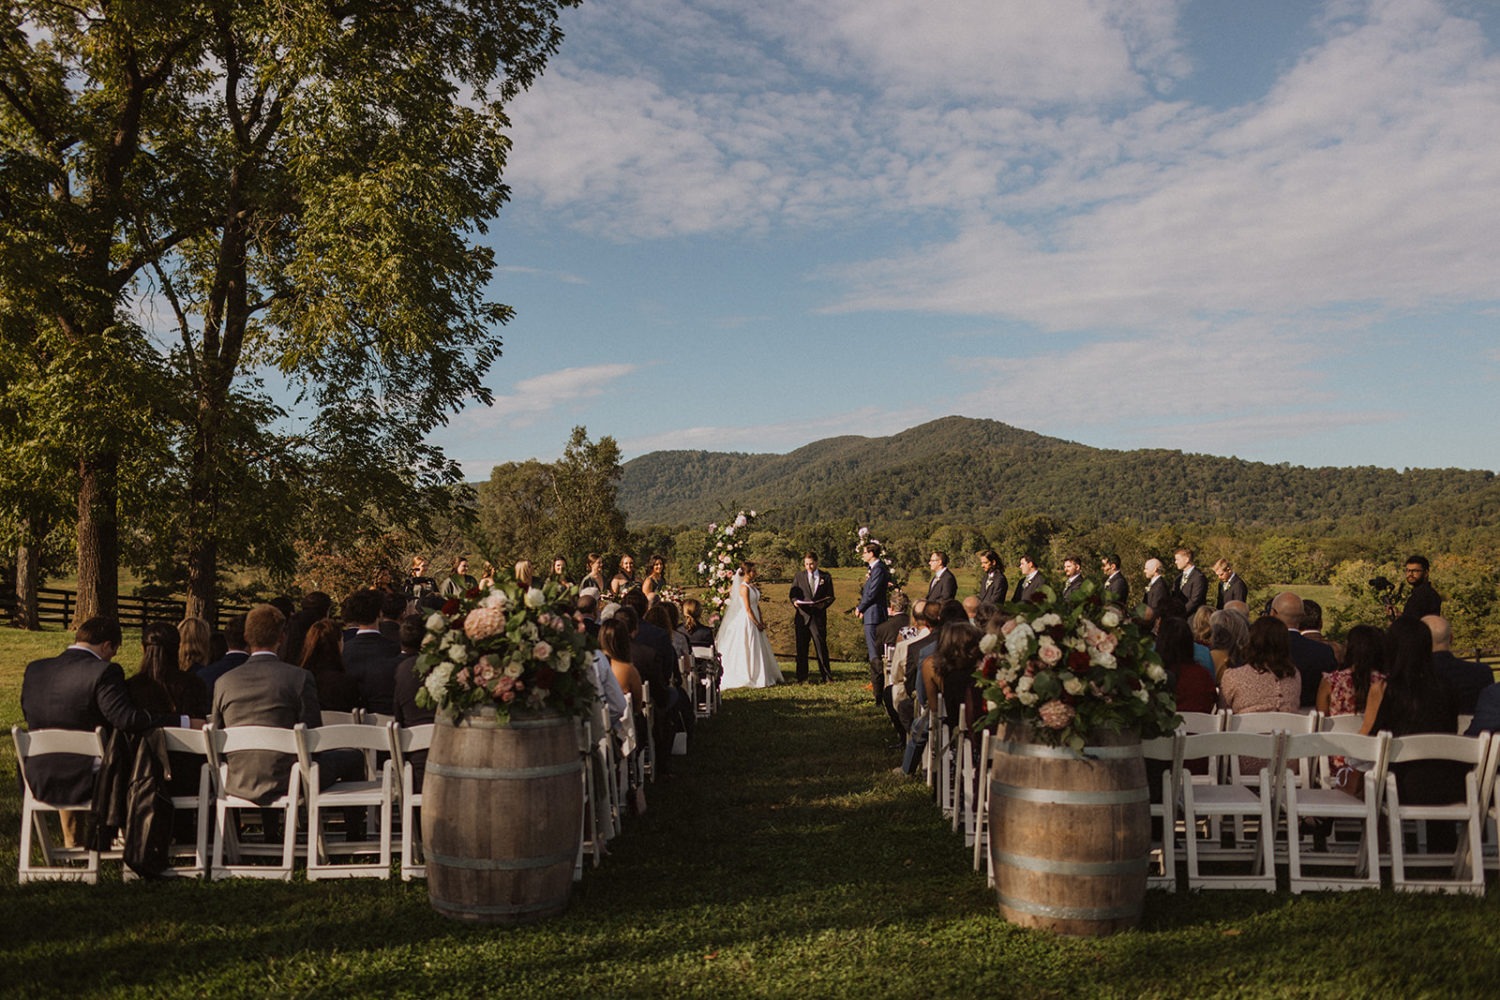 couple exchanges vows at sunset Virginia wedding ranch venue